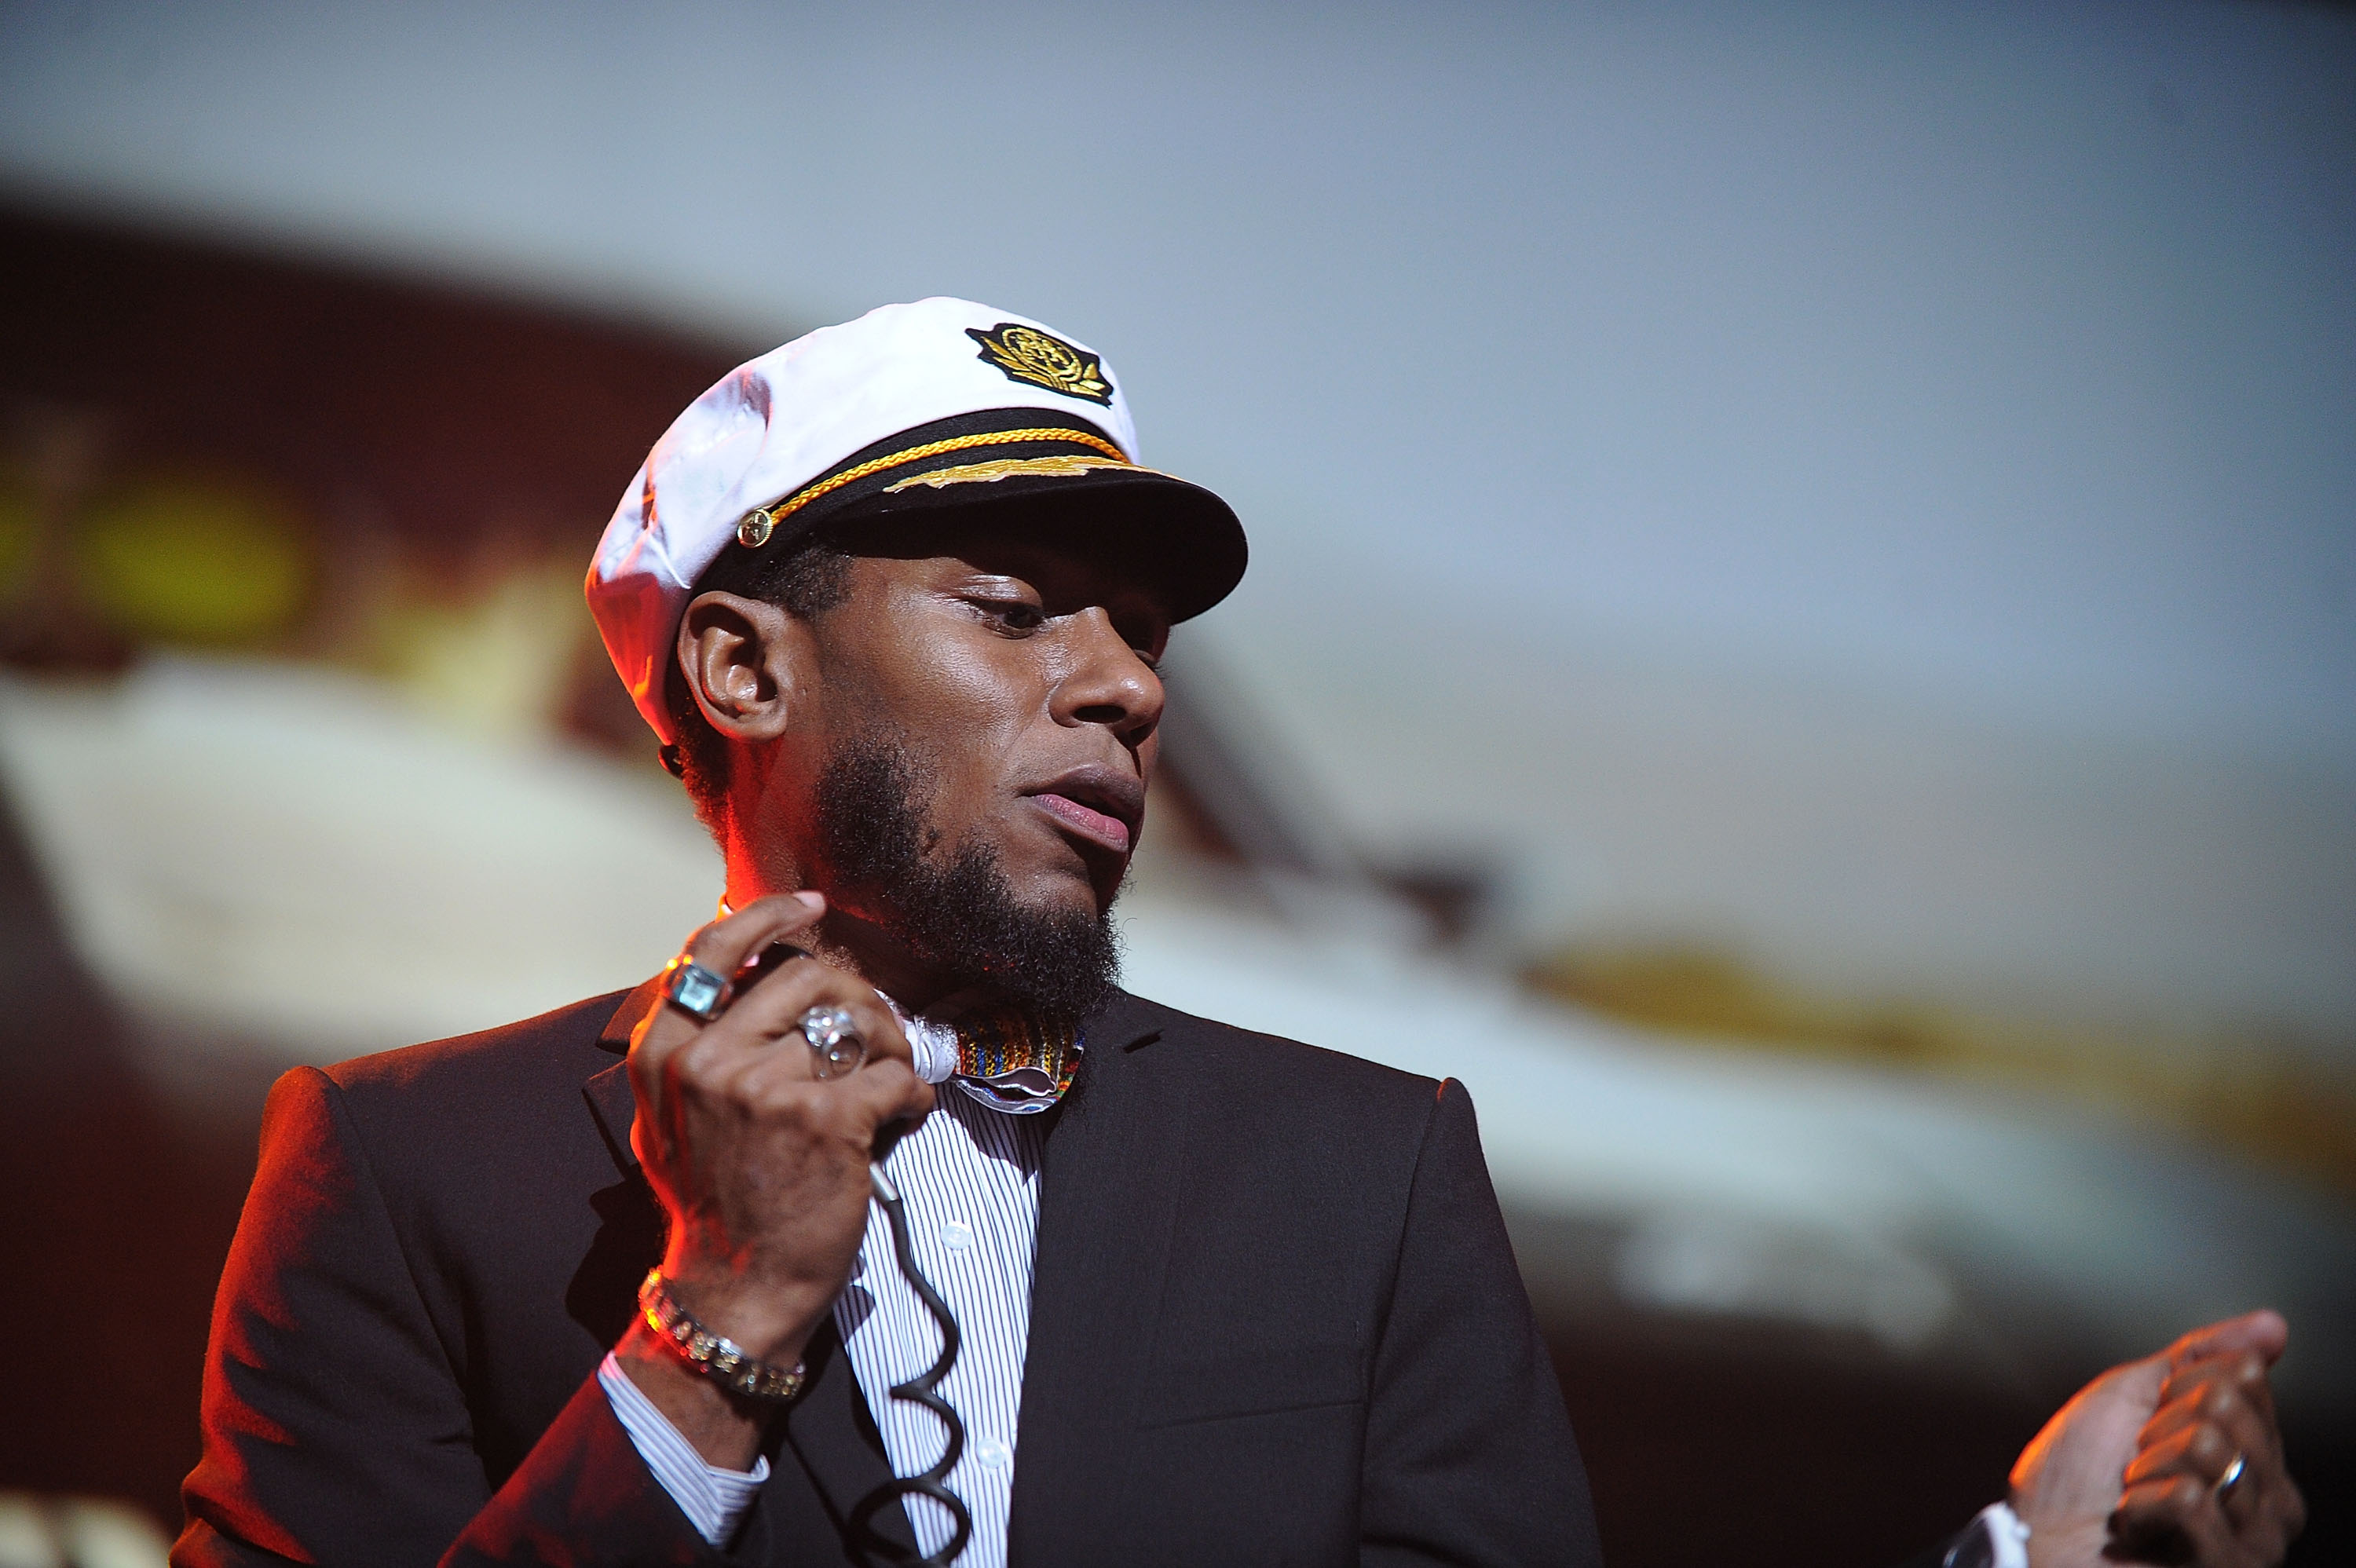 Yasiin Bey Drops Thelonious Monk Biopic After Family Disapproves – IndieWire